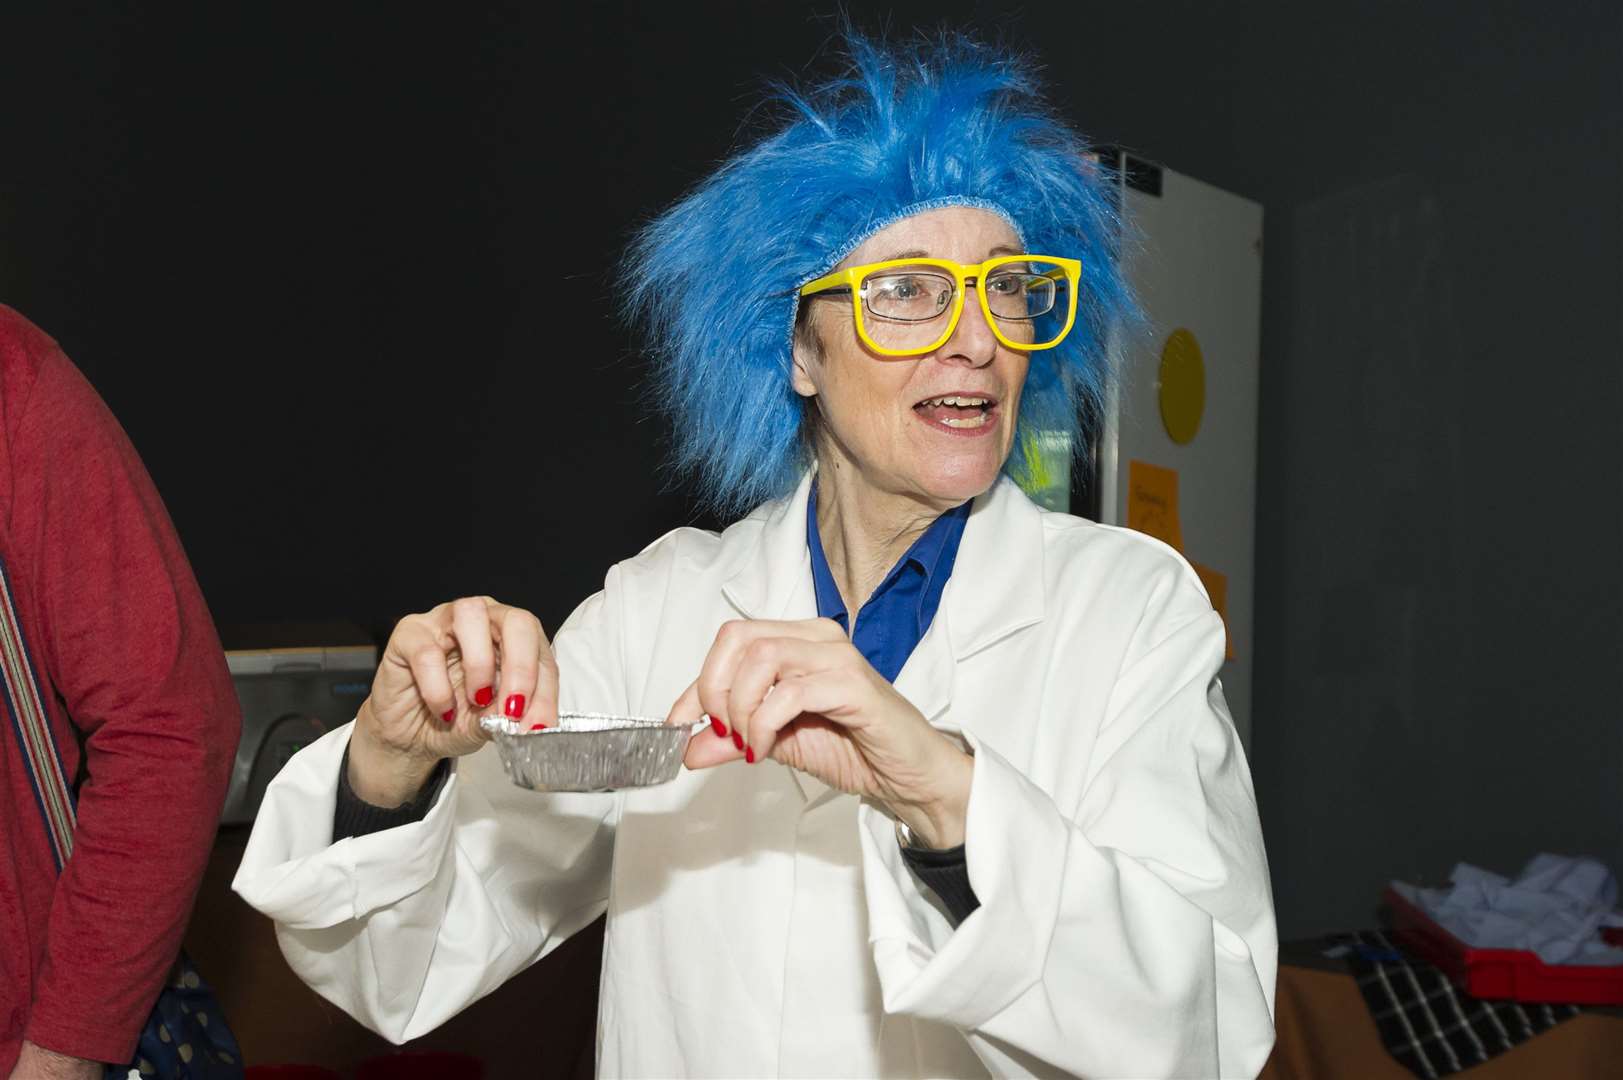 Join Dr Bunsen at the dockyard lab